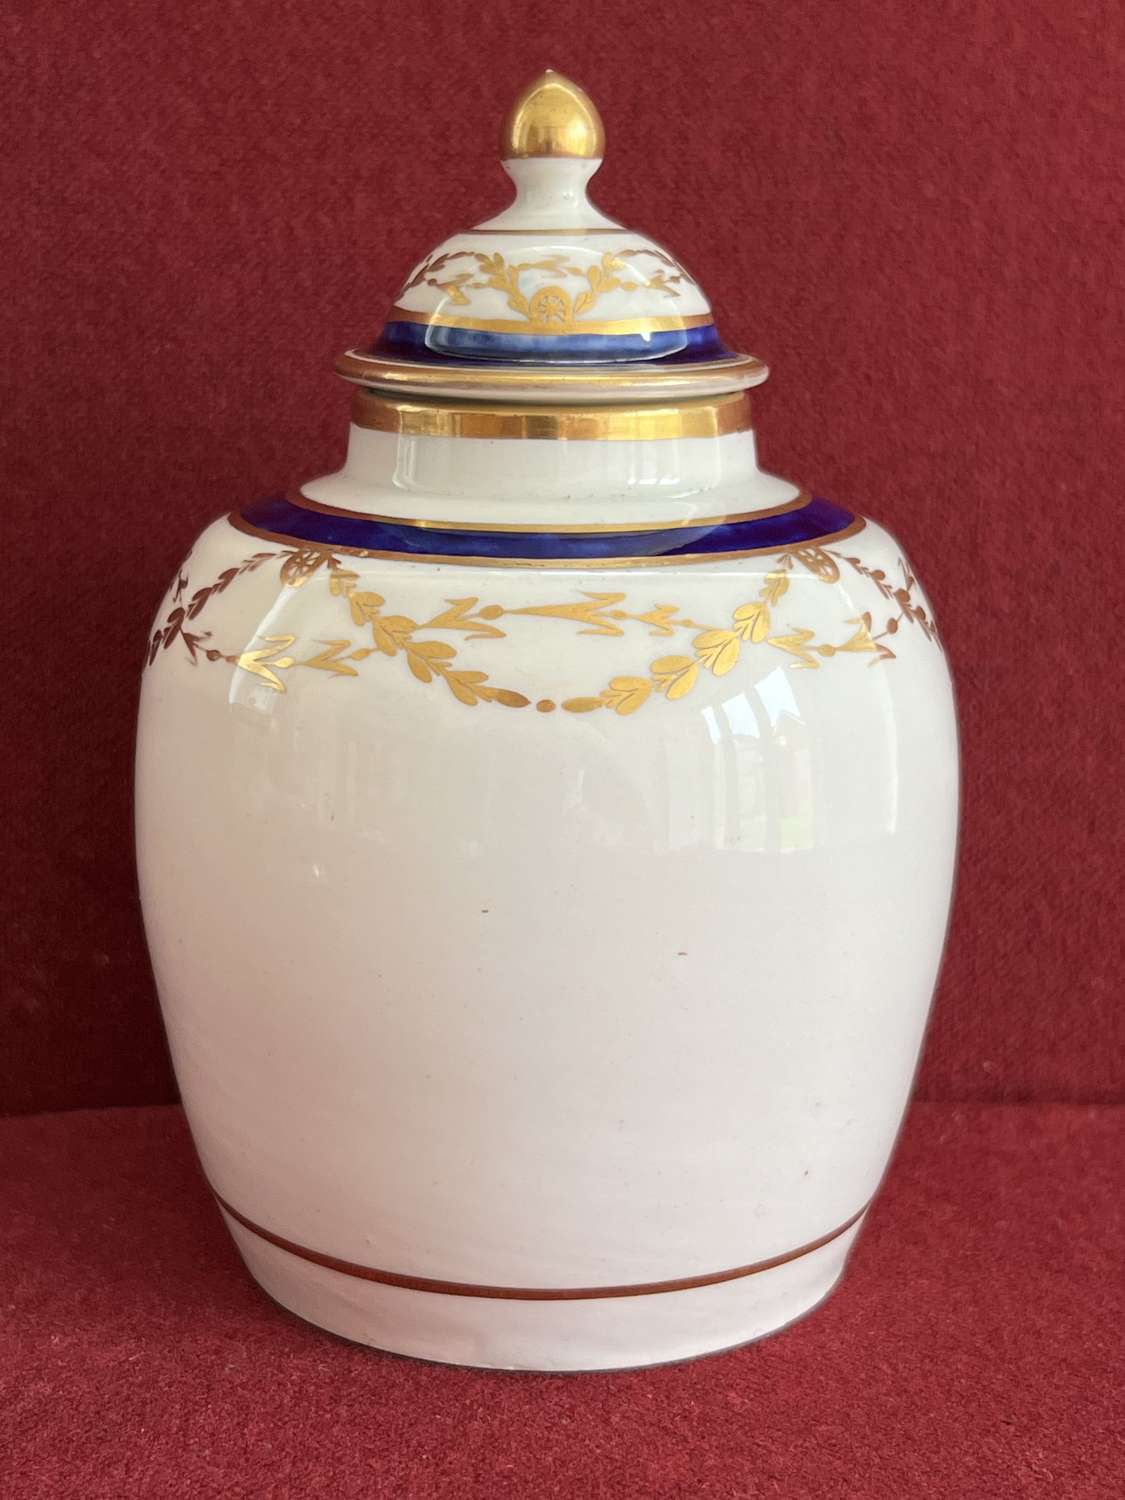 A rare early New Hall Porcelain Tea Cannister & Cover c.1785 - 1790